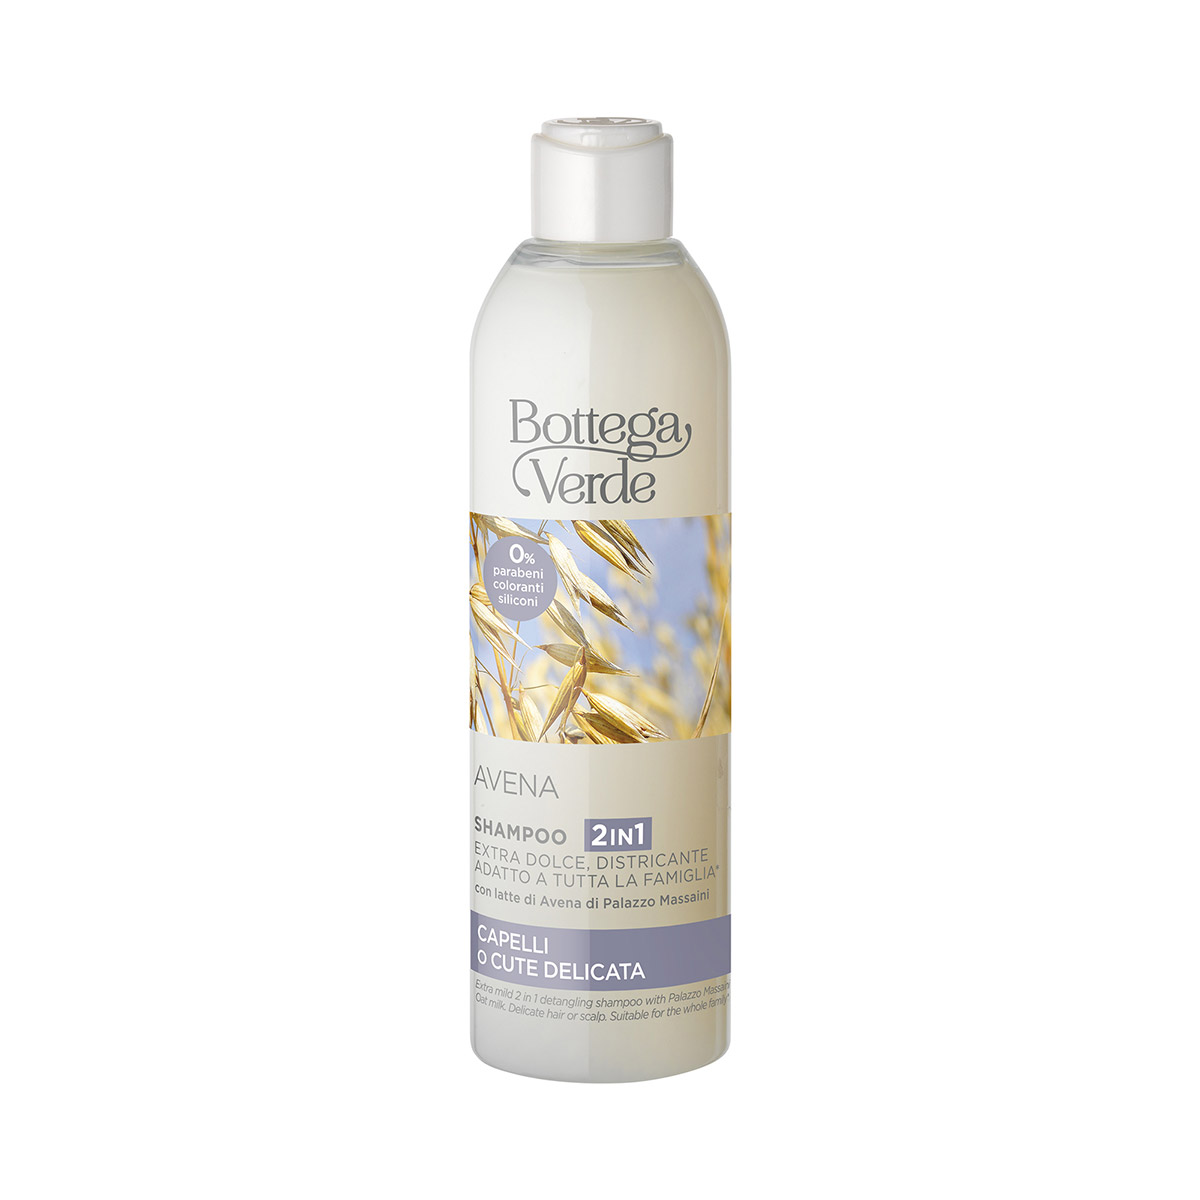 AVENA - Extra mild 2 in 1 detangling shampoo - with Palazzo Massaini Oat milk - delicate hair or scalp - suitable for the whole family* (250 ml)